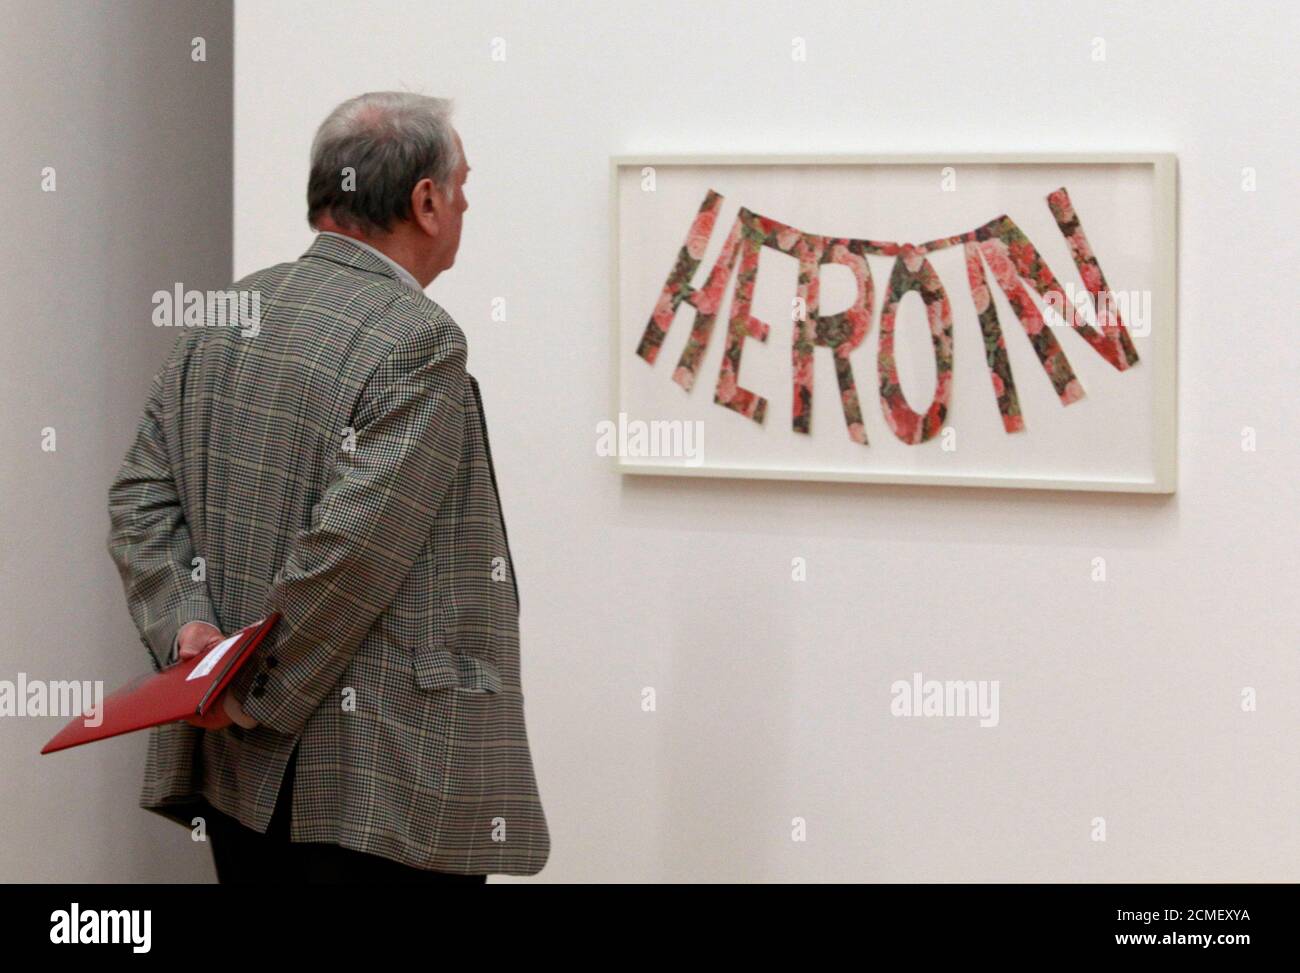 A man looks at the work 'Heroin' by Jack Pierson from the Judith Rothschild Foundation Contemporary Drawings Collection of the Museum of Modern Art New York (MoMA)  that is on show in the Martin-Gropius museum in Berlin, March 10, 2011. The exhibition 'Kompass-Zeichnungen' opens to the public on March 11.  REUTERS/Thomas Peter  (GERMANY - Tags: ENTERTAINMENT) Stock Photo